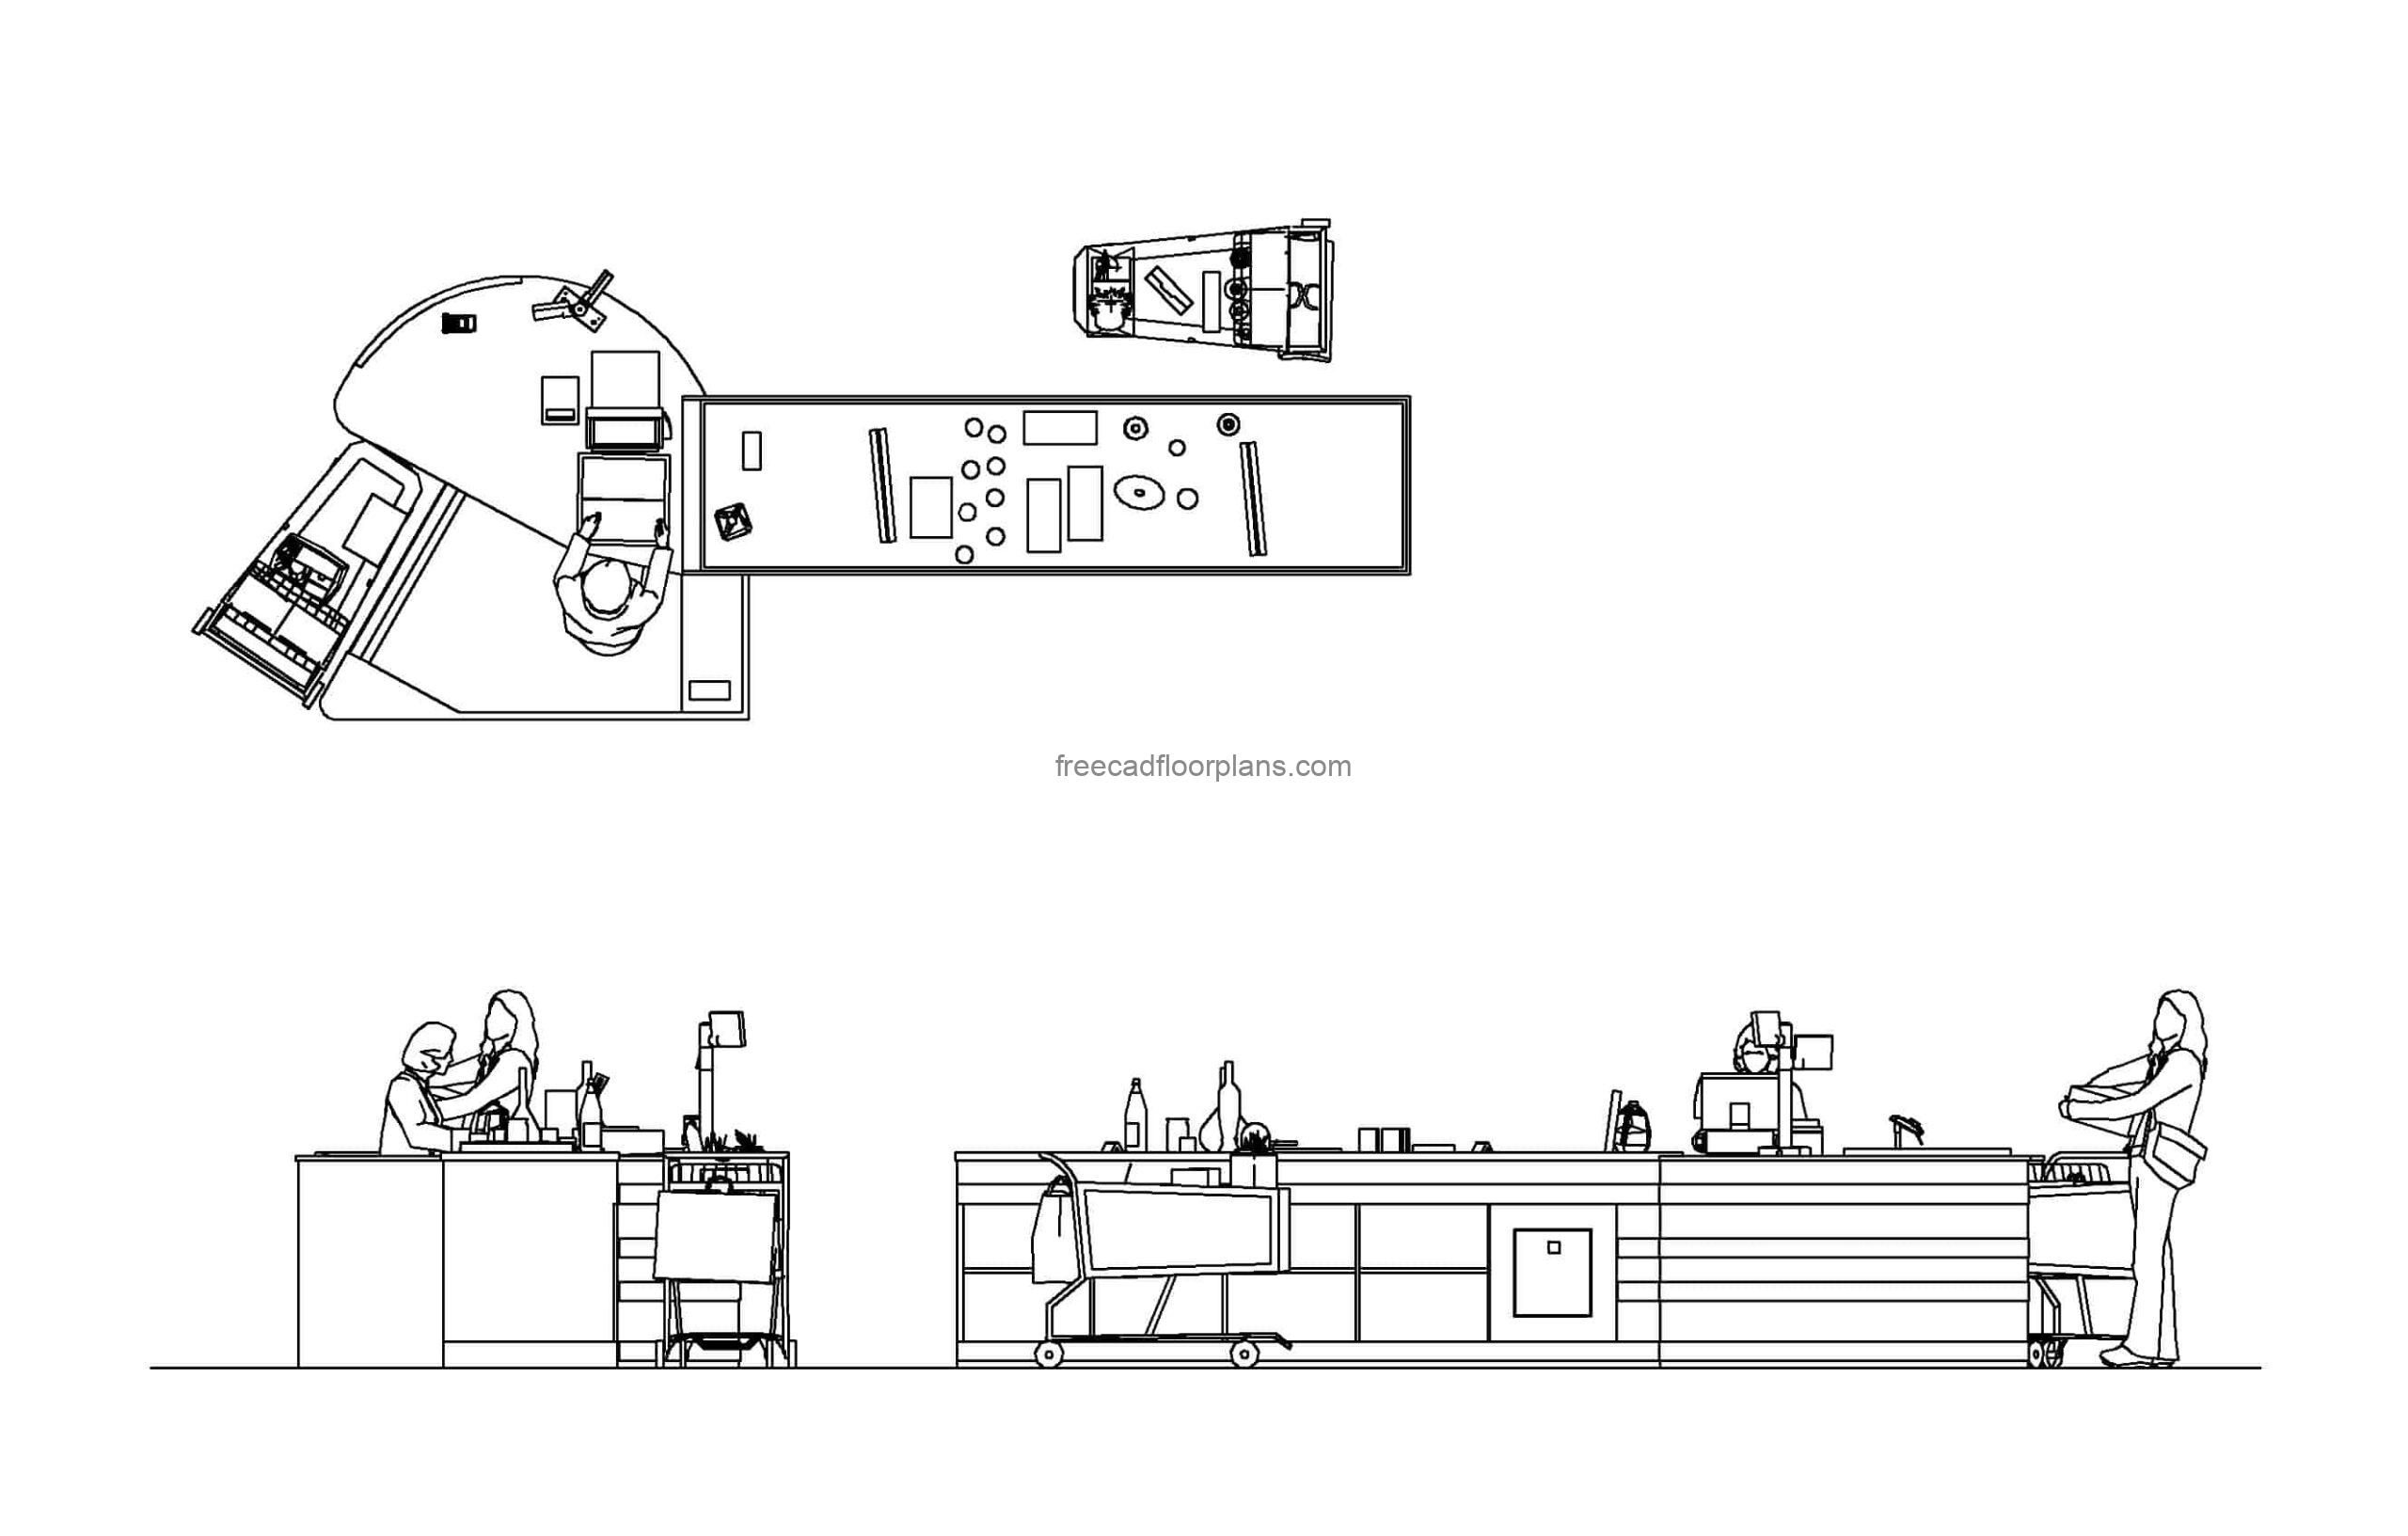 autocad drawing of a supermarket cash counter, plan and elevations 2d views, dwg file for free download